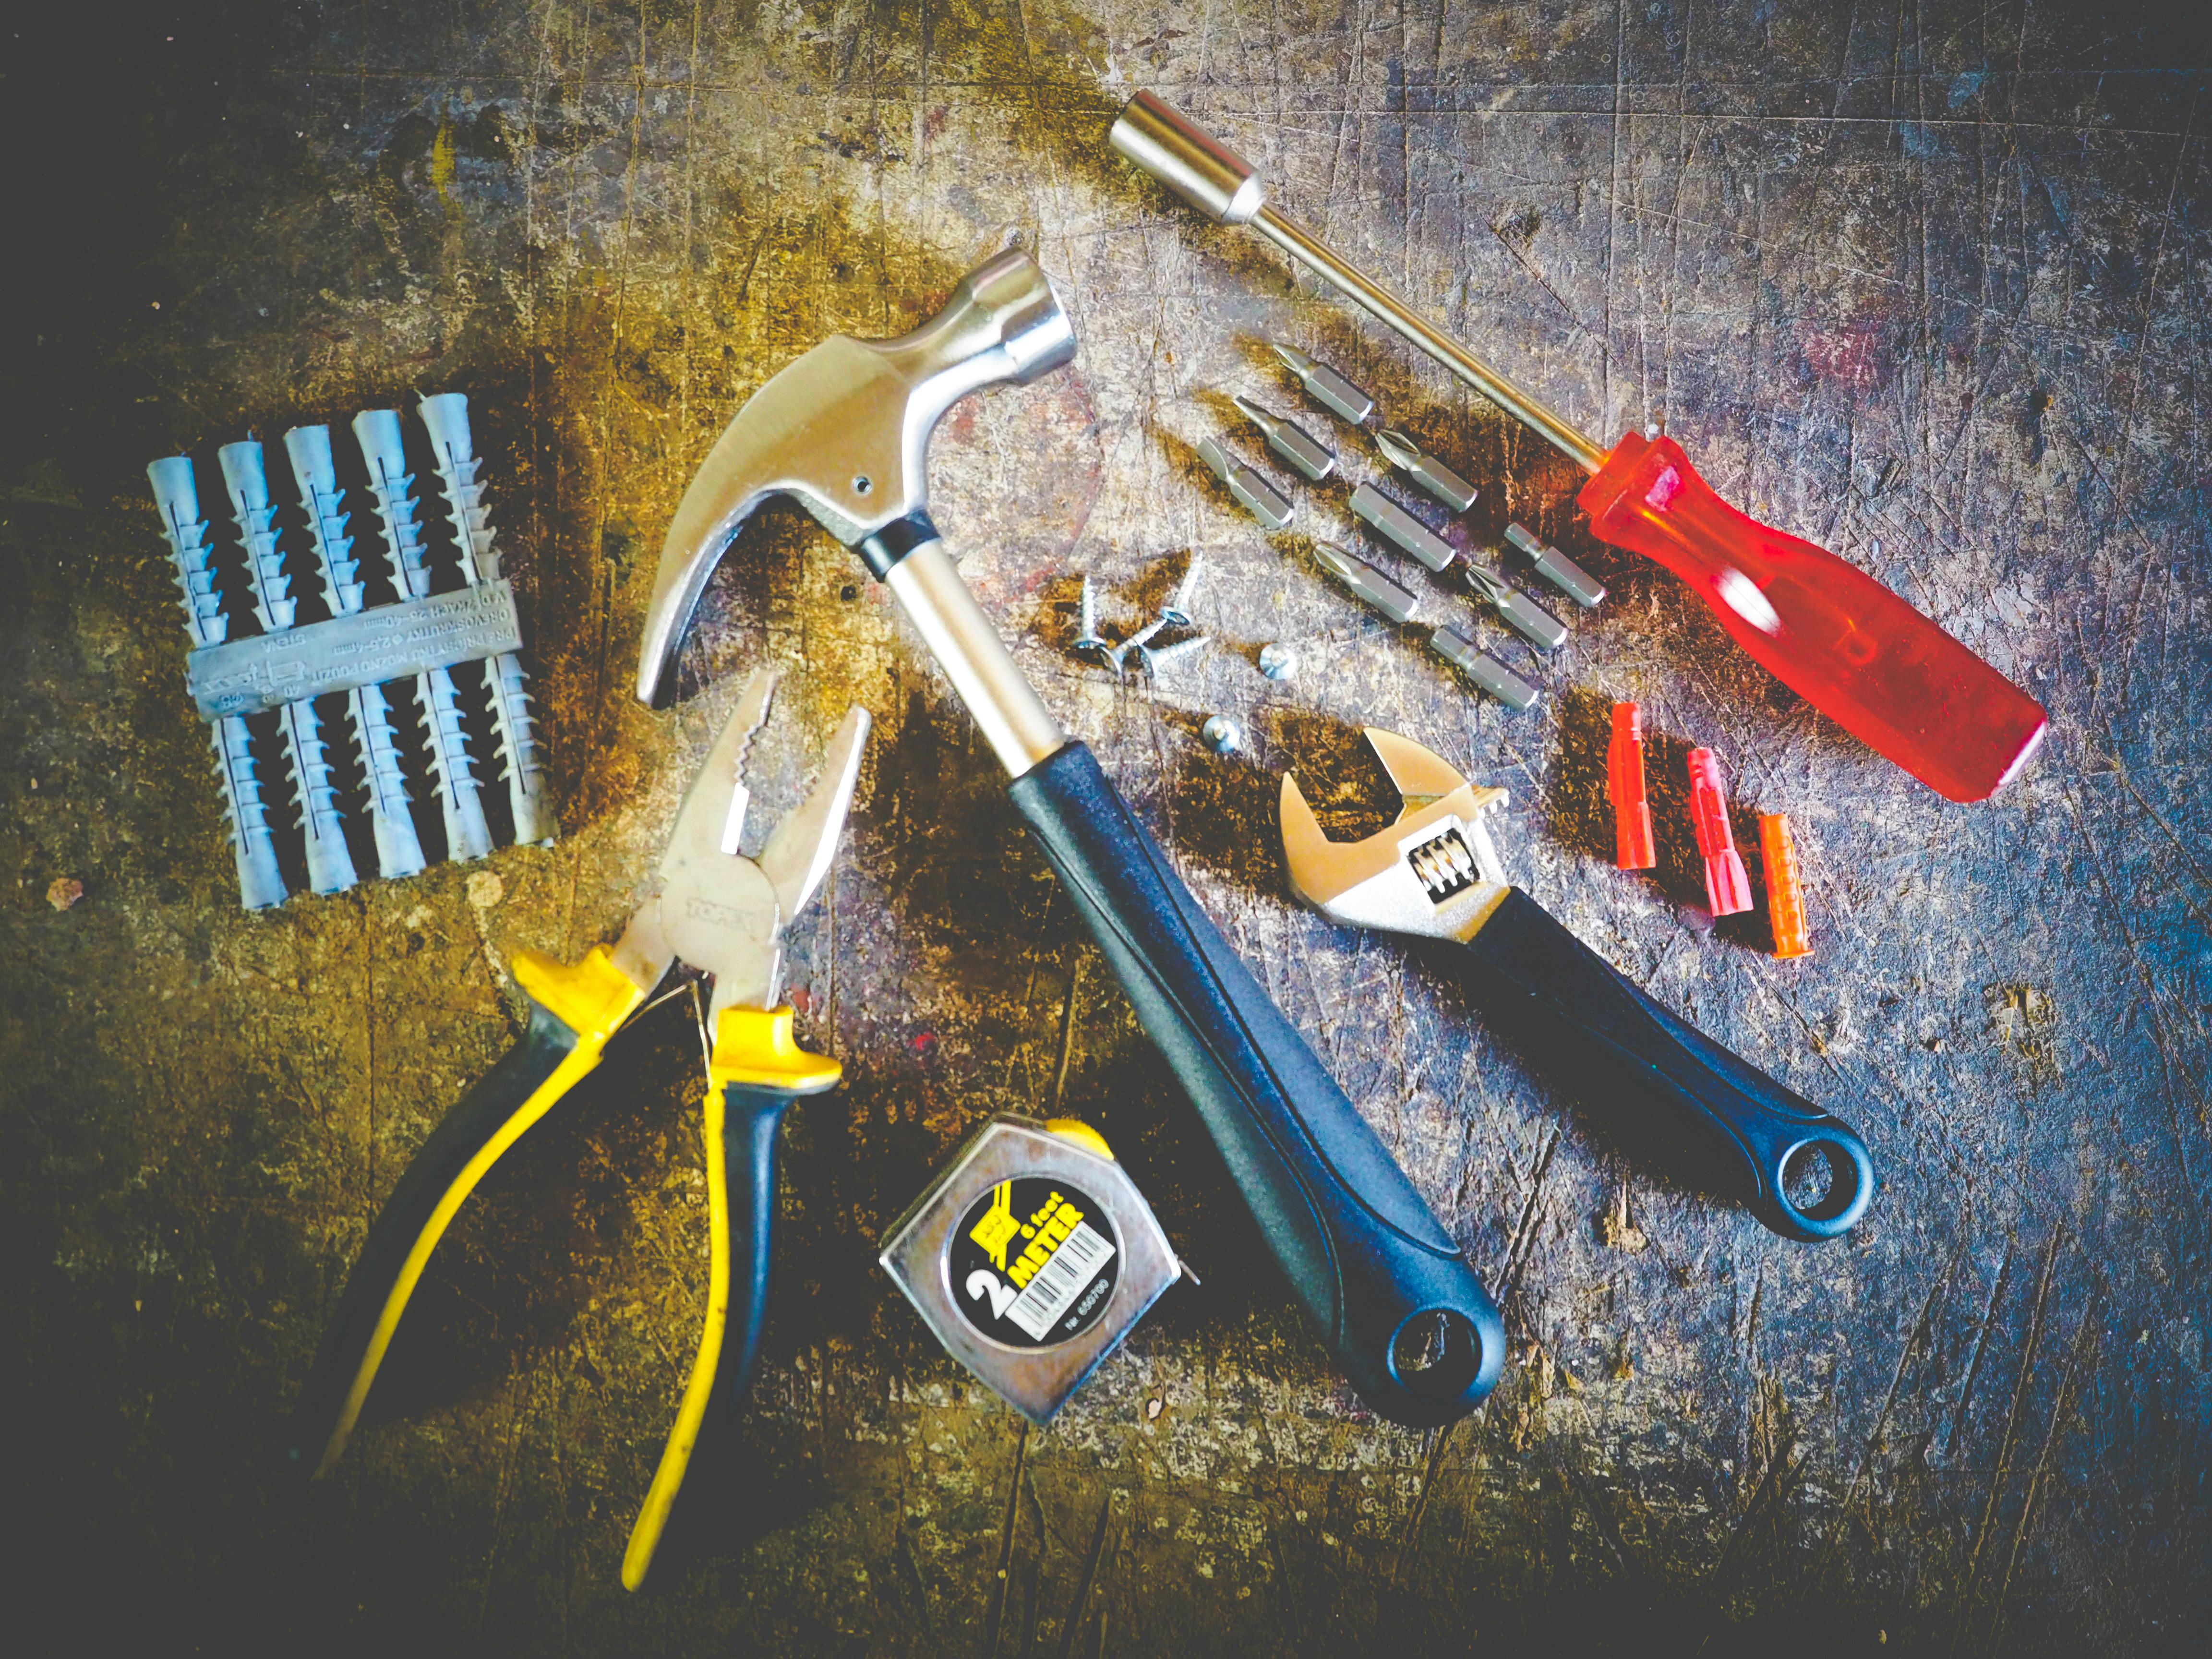 Tools Photos, Download The BEST Free Tools Stock Photos & HD Images